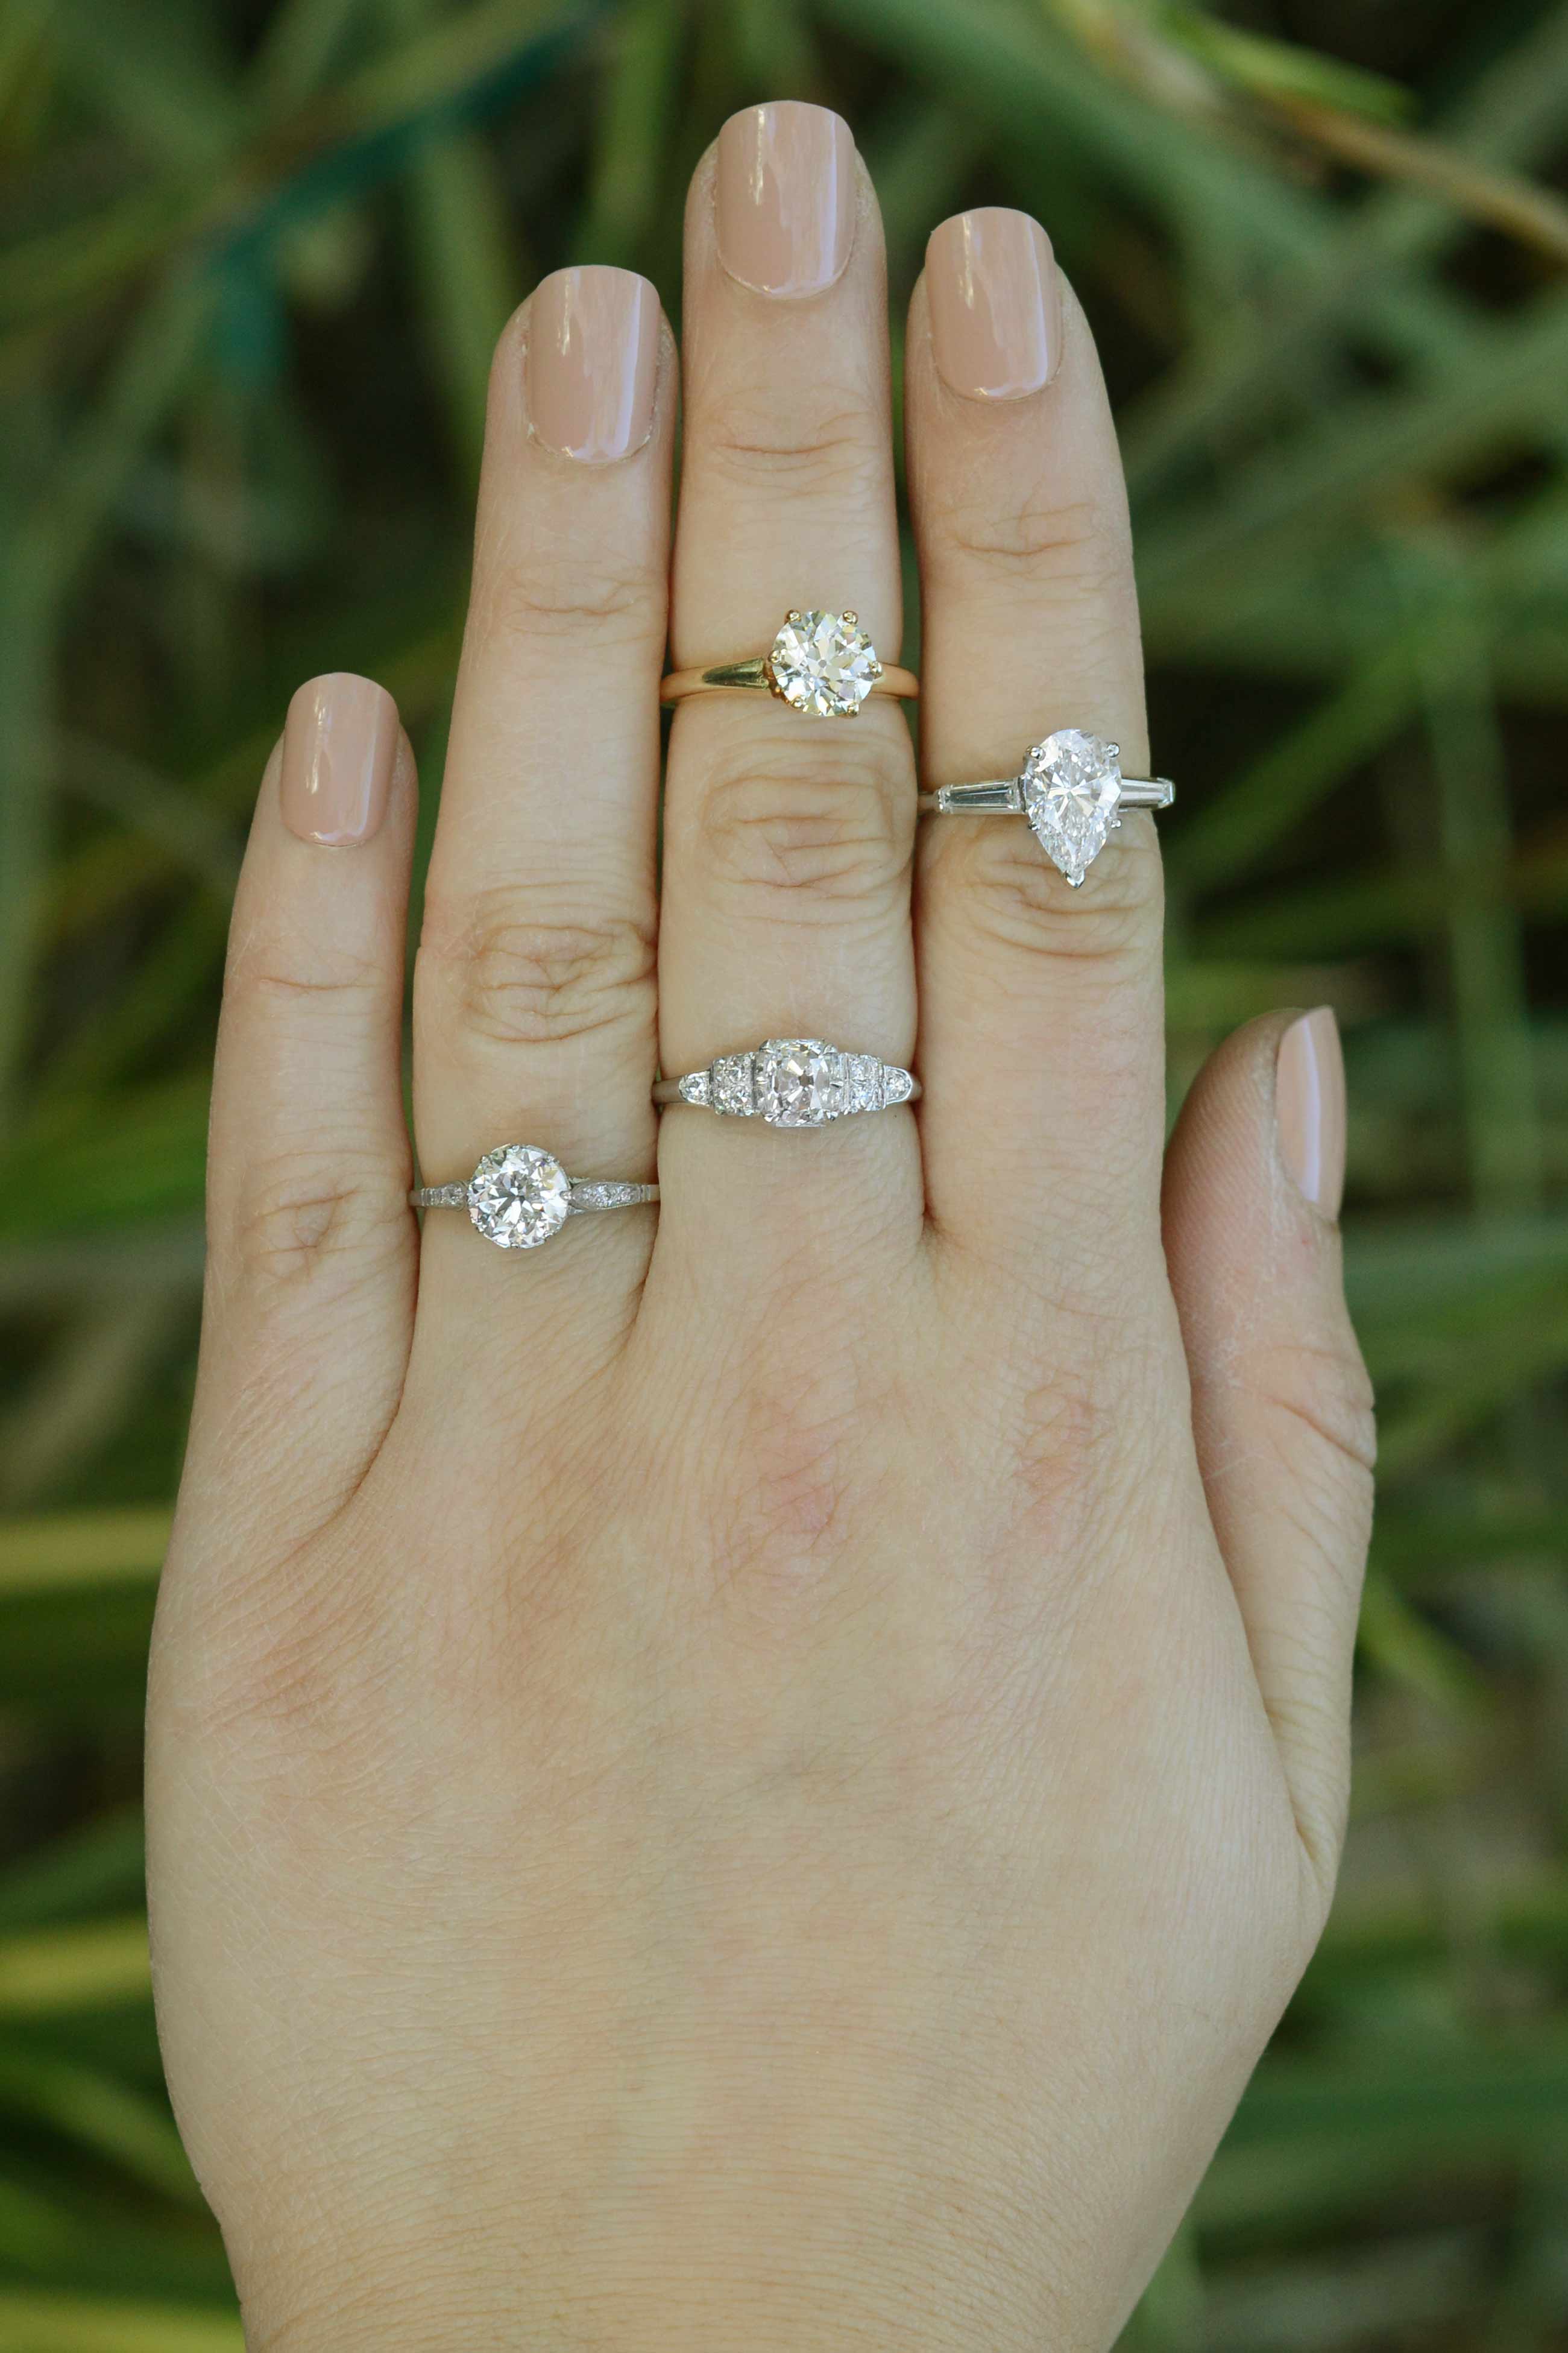 We have a variety of diamond solitaire engagment rings in platinum, white & yellow gold.